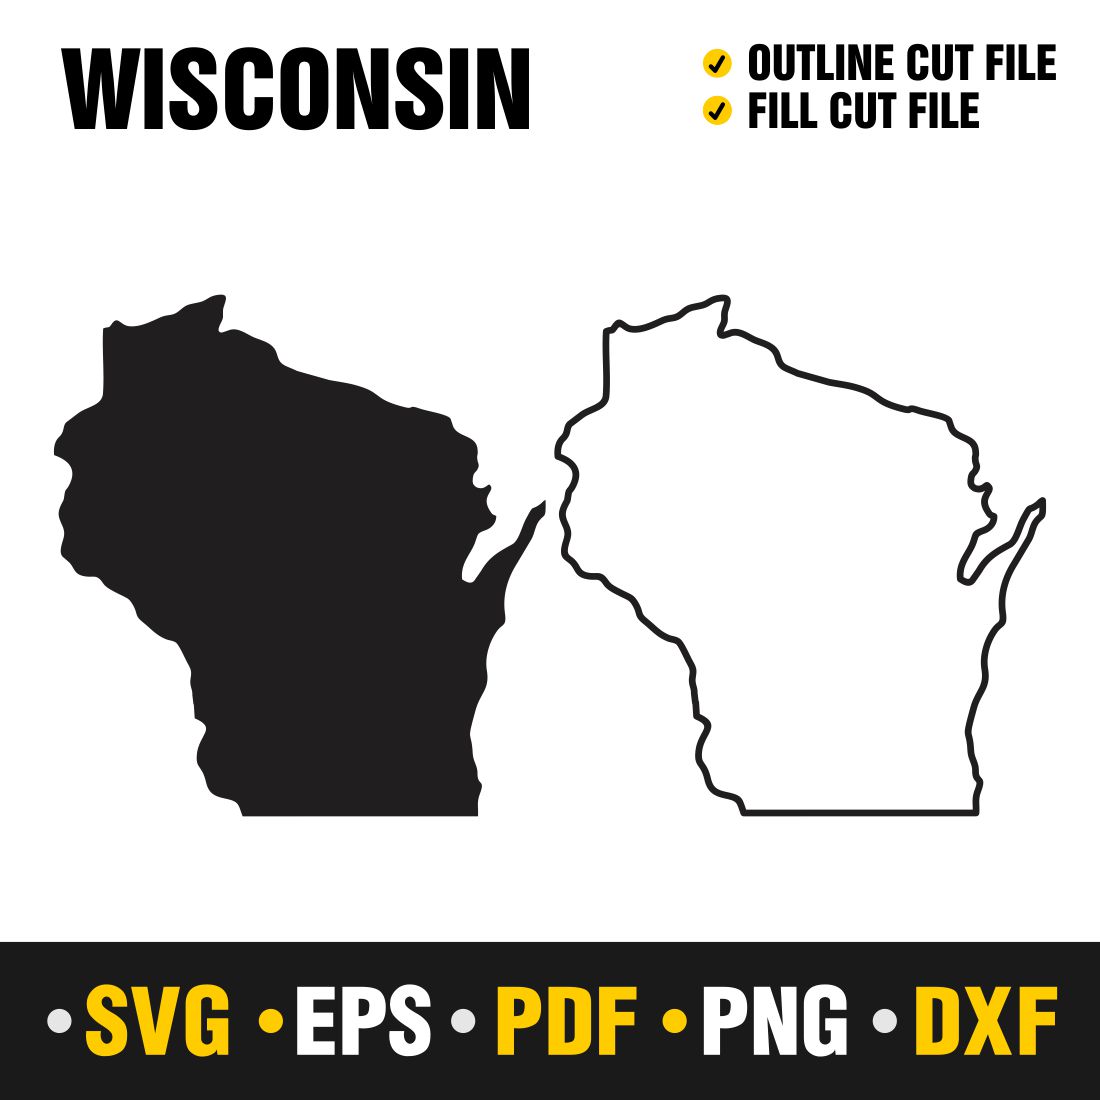 Wisconsin SVG, PNG, PDF, EPS & DXF cover image.